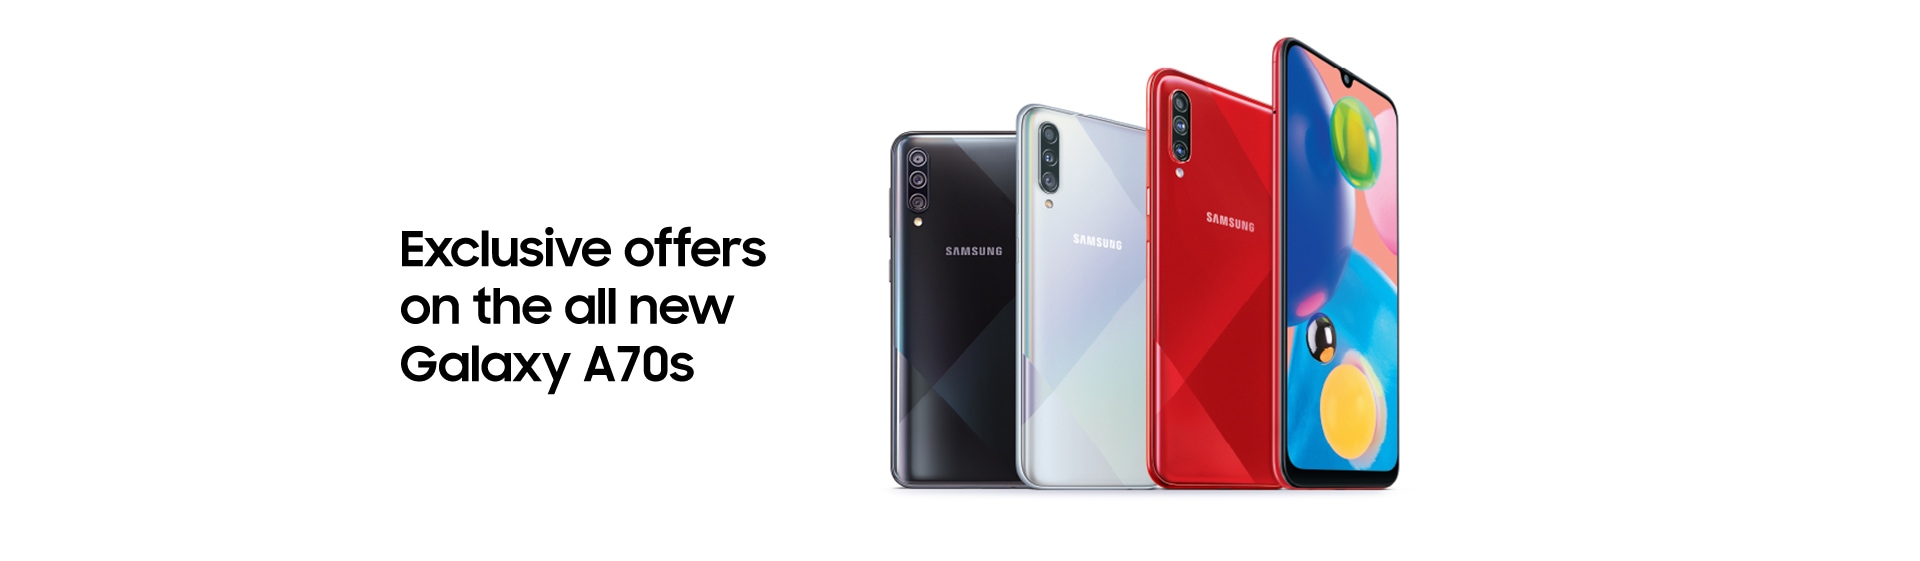 Exclusive Offers On Samsung Galaxy A70s Samsung India